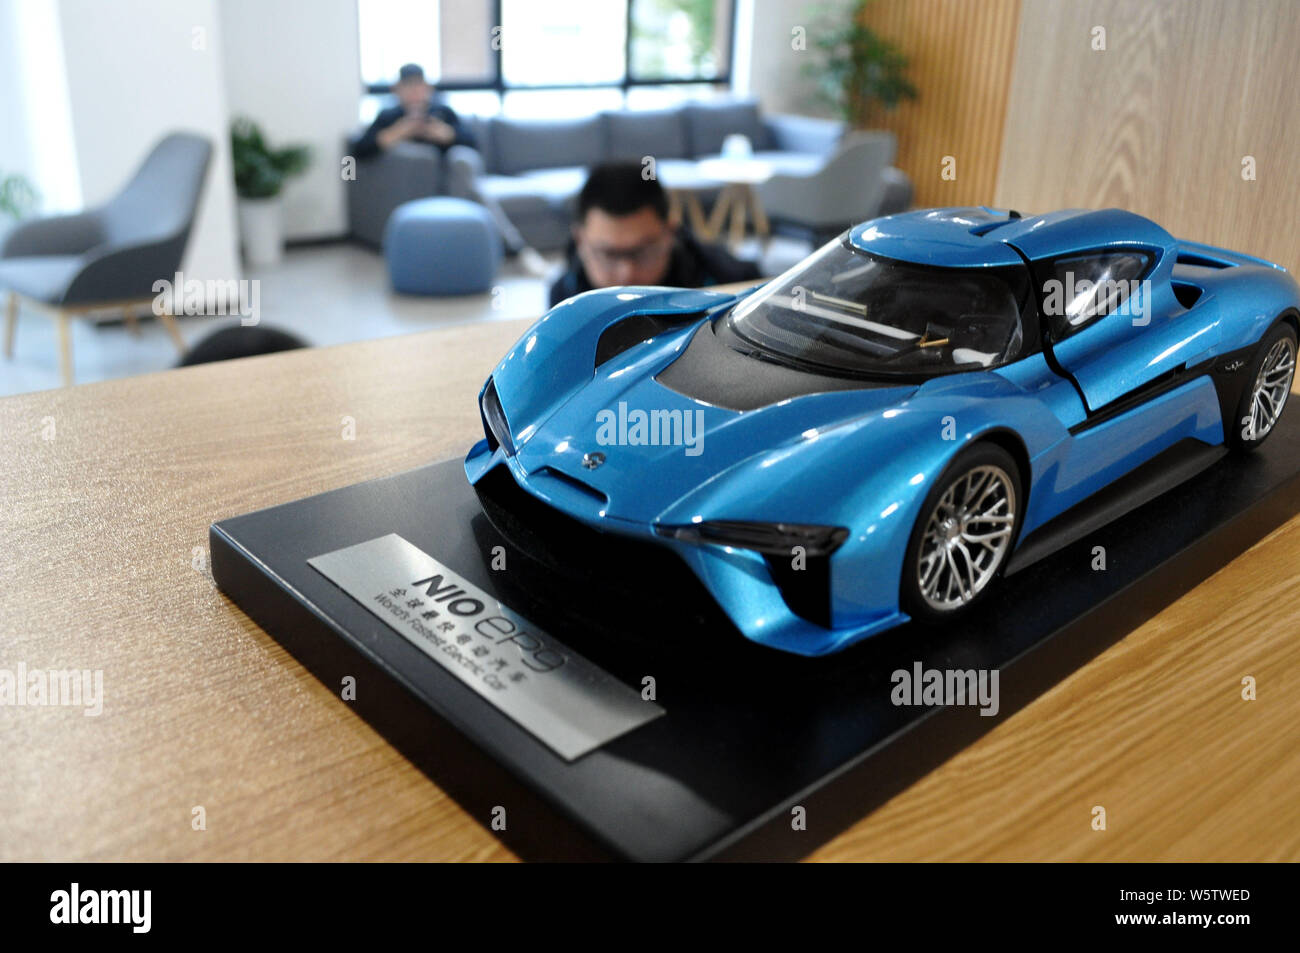 File A Model Of Nio Ep9 Electric Supercar Of Nextev Is Displayed At The Nio Delivery Center In Shanghai China 8 December 18 Nio Inc A Chine Stock Photo Alamy